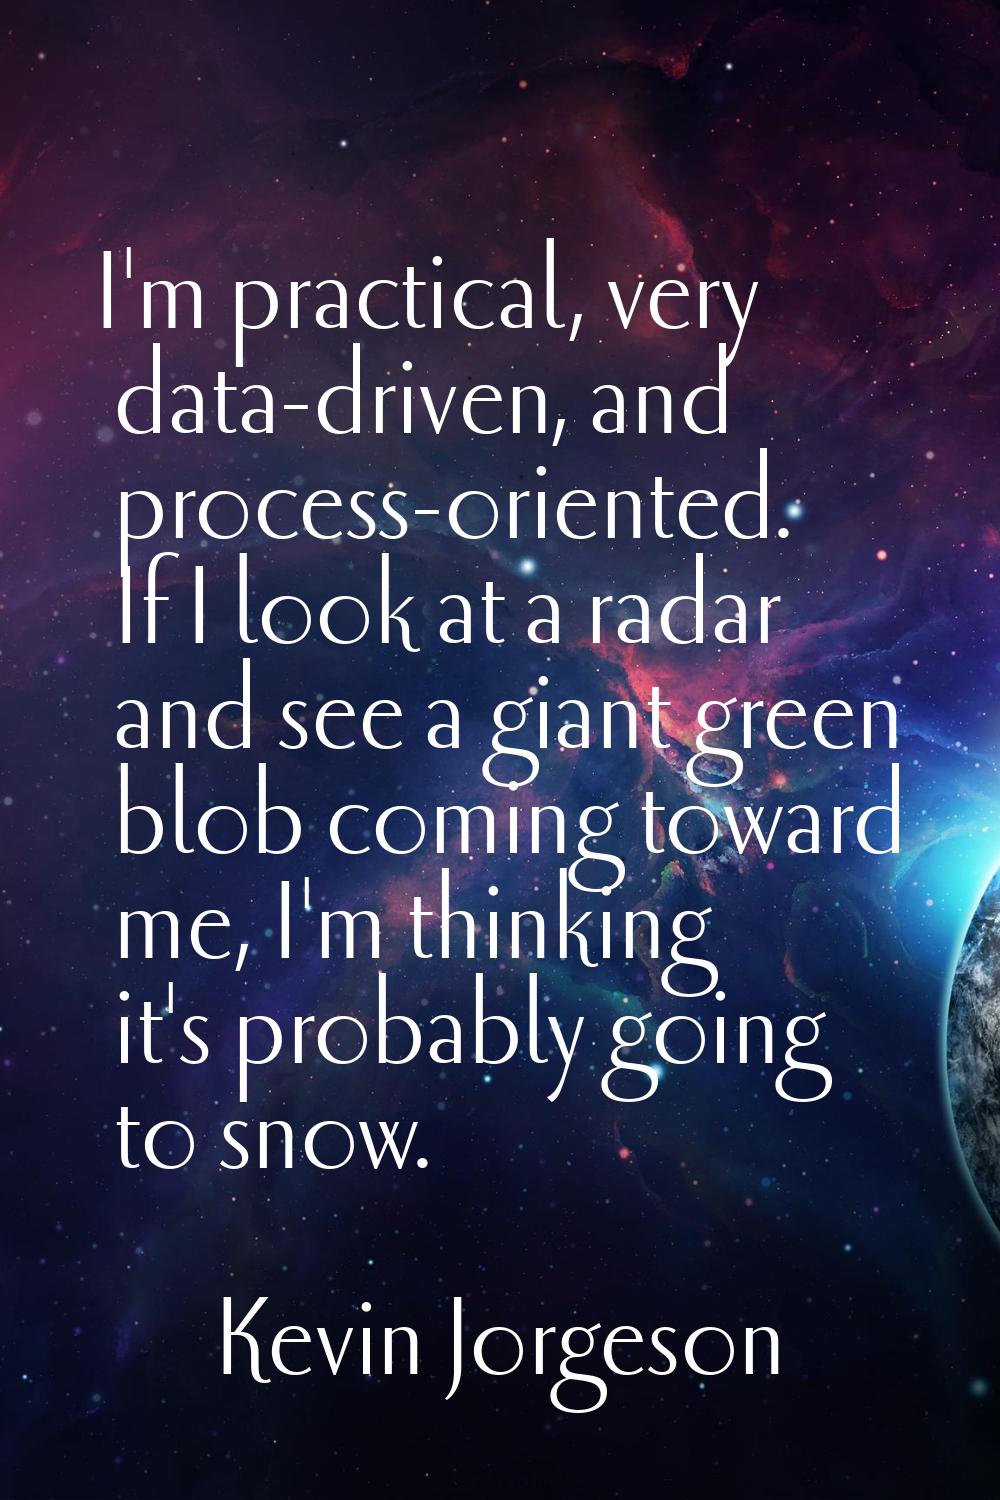 I'm practical, very data-driven, and process-oriented. If I look at a radar and see a giant green b